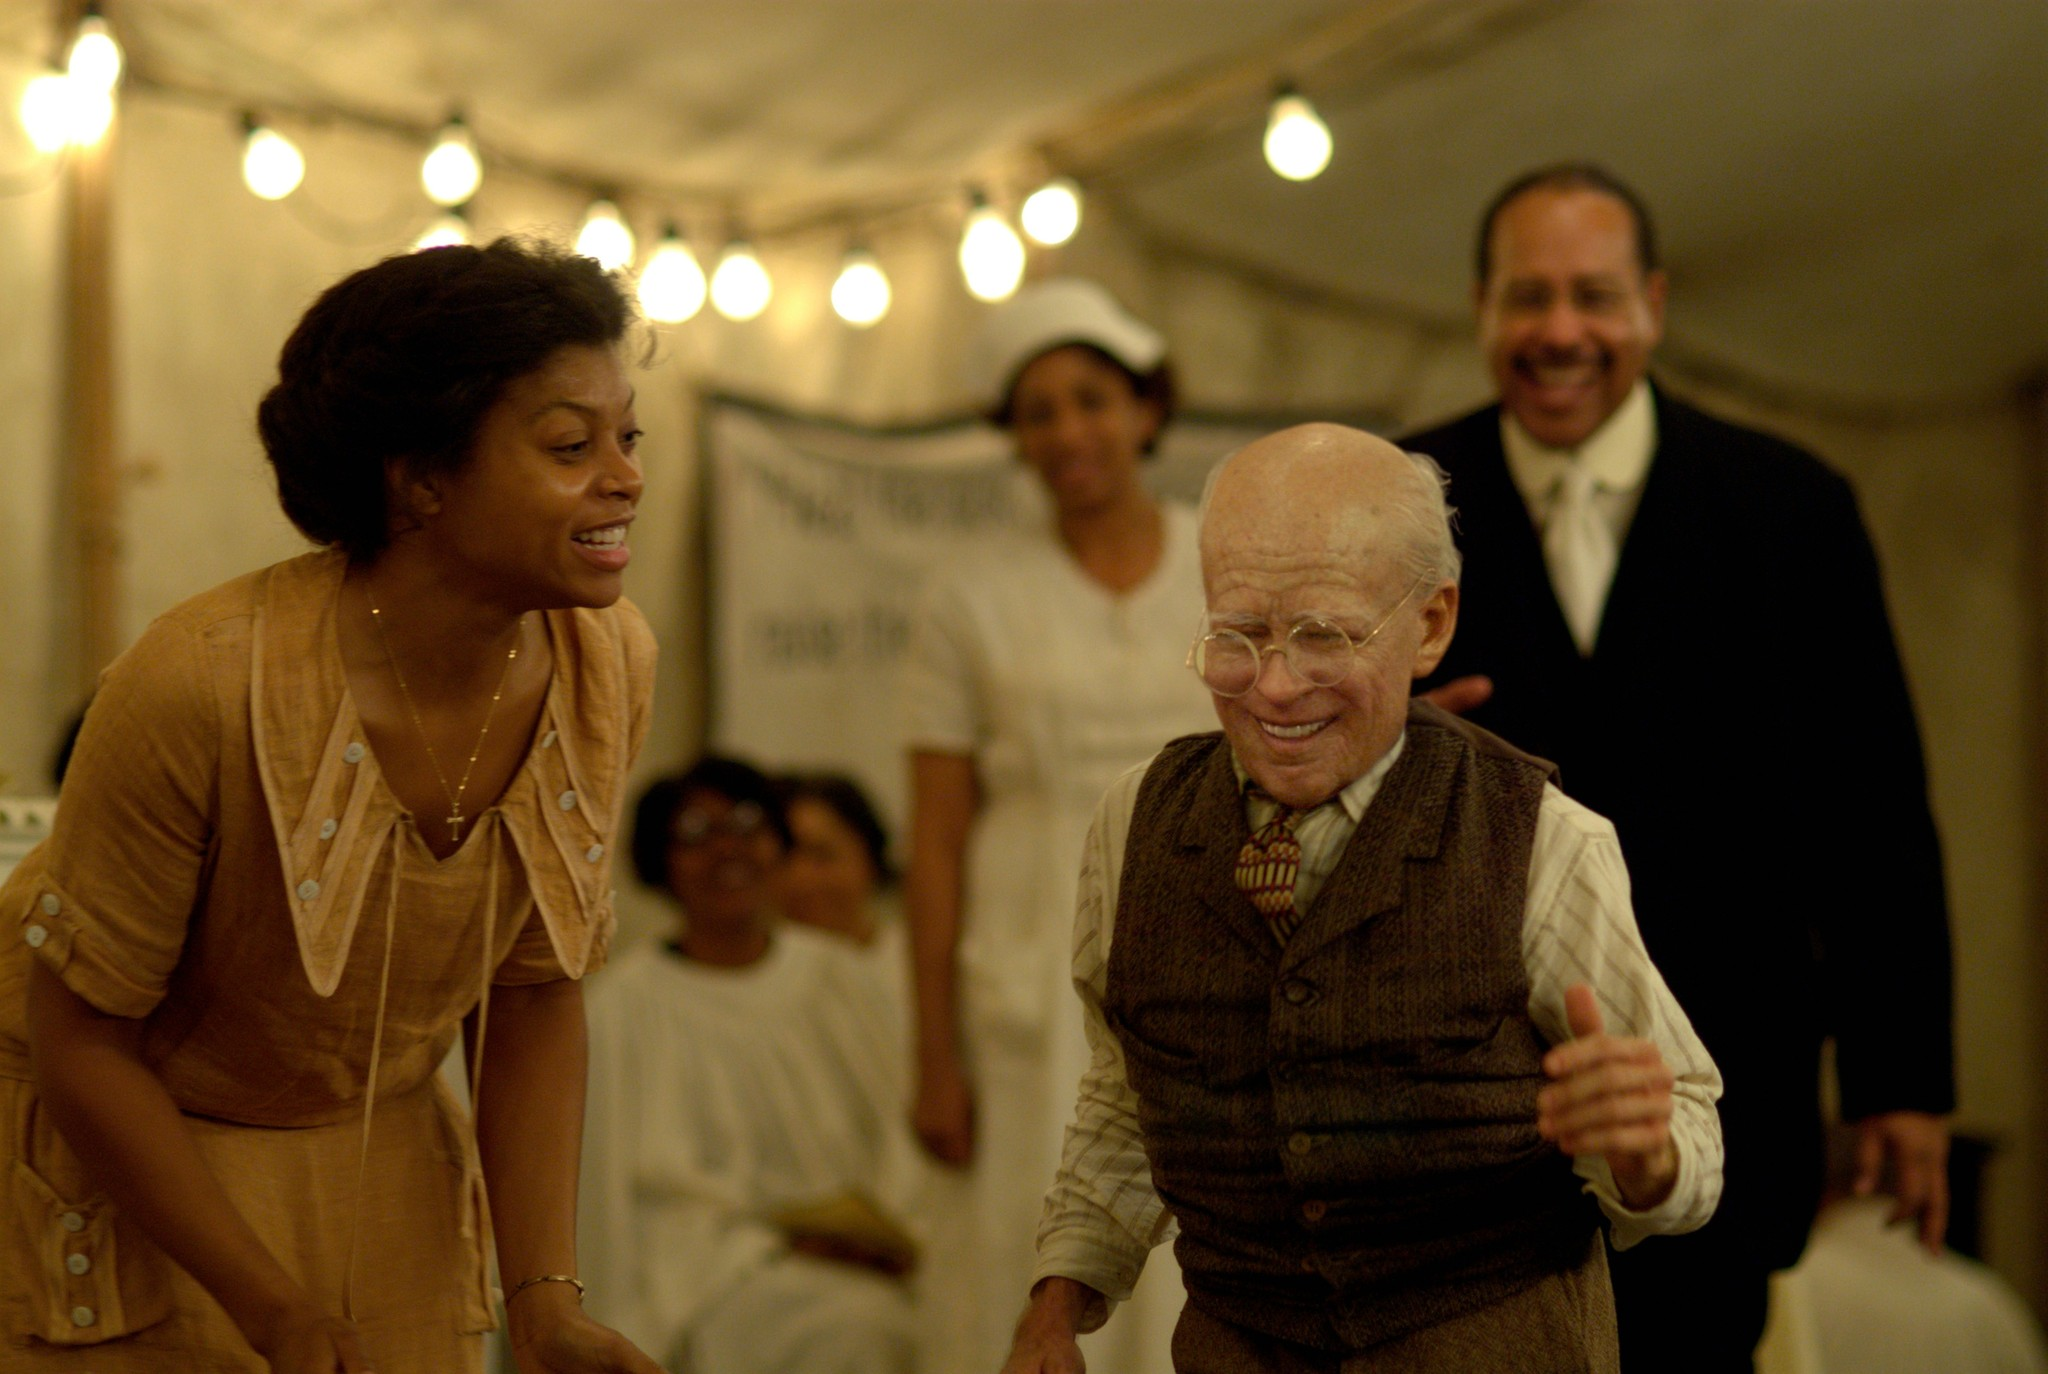 9. The Curious Case of Benjamin Button (2008) - Interesting Visual Effects